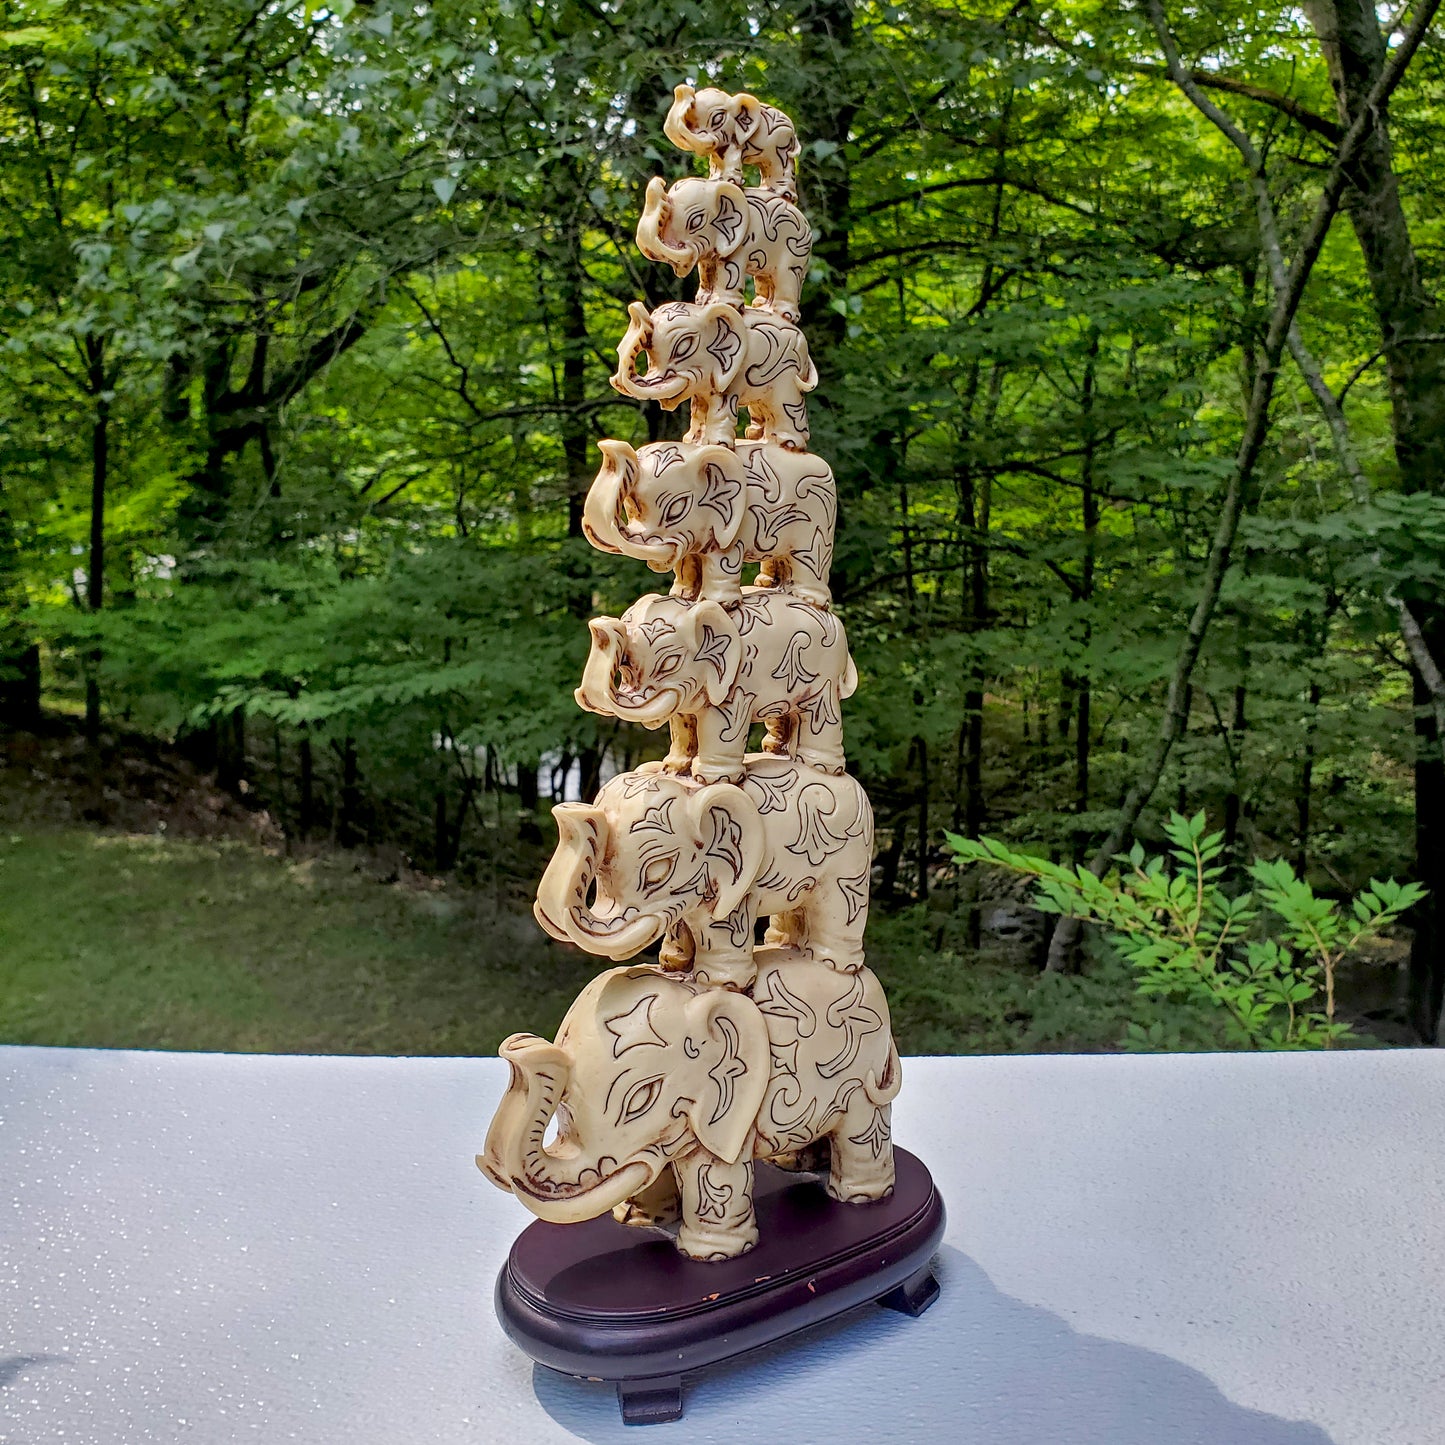 Vintage Resin Lucky Seven Stacked Elephants 16.5" Sculpture | Feng Shui Home Decor  15.5"